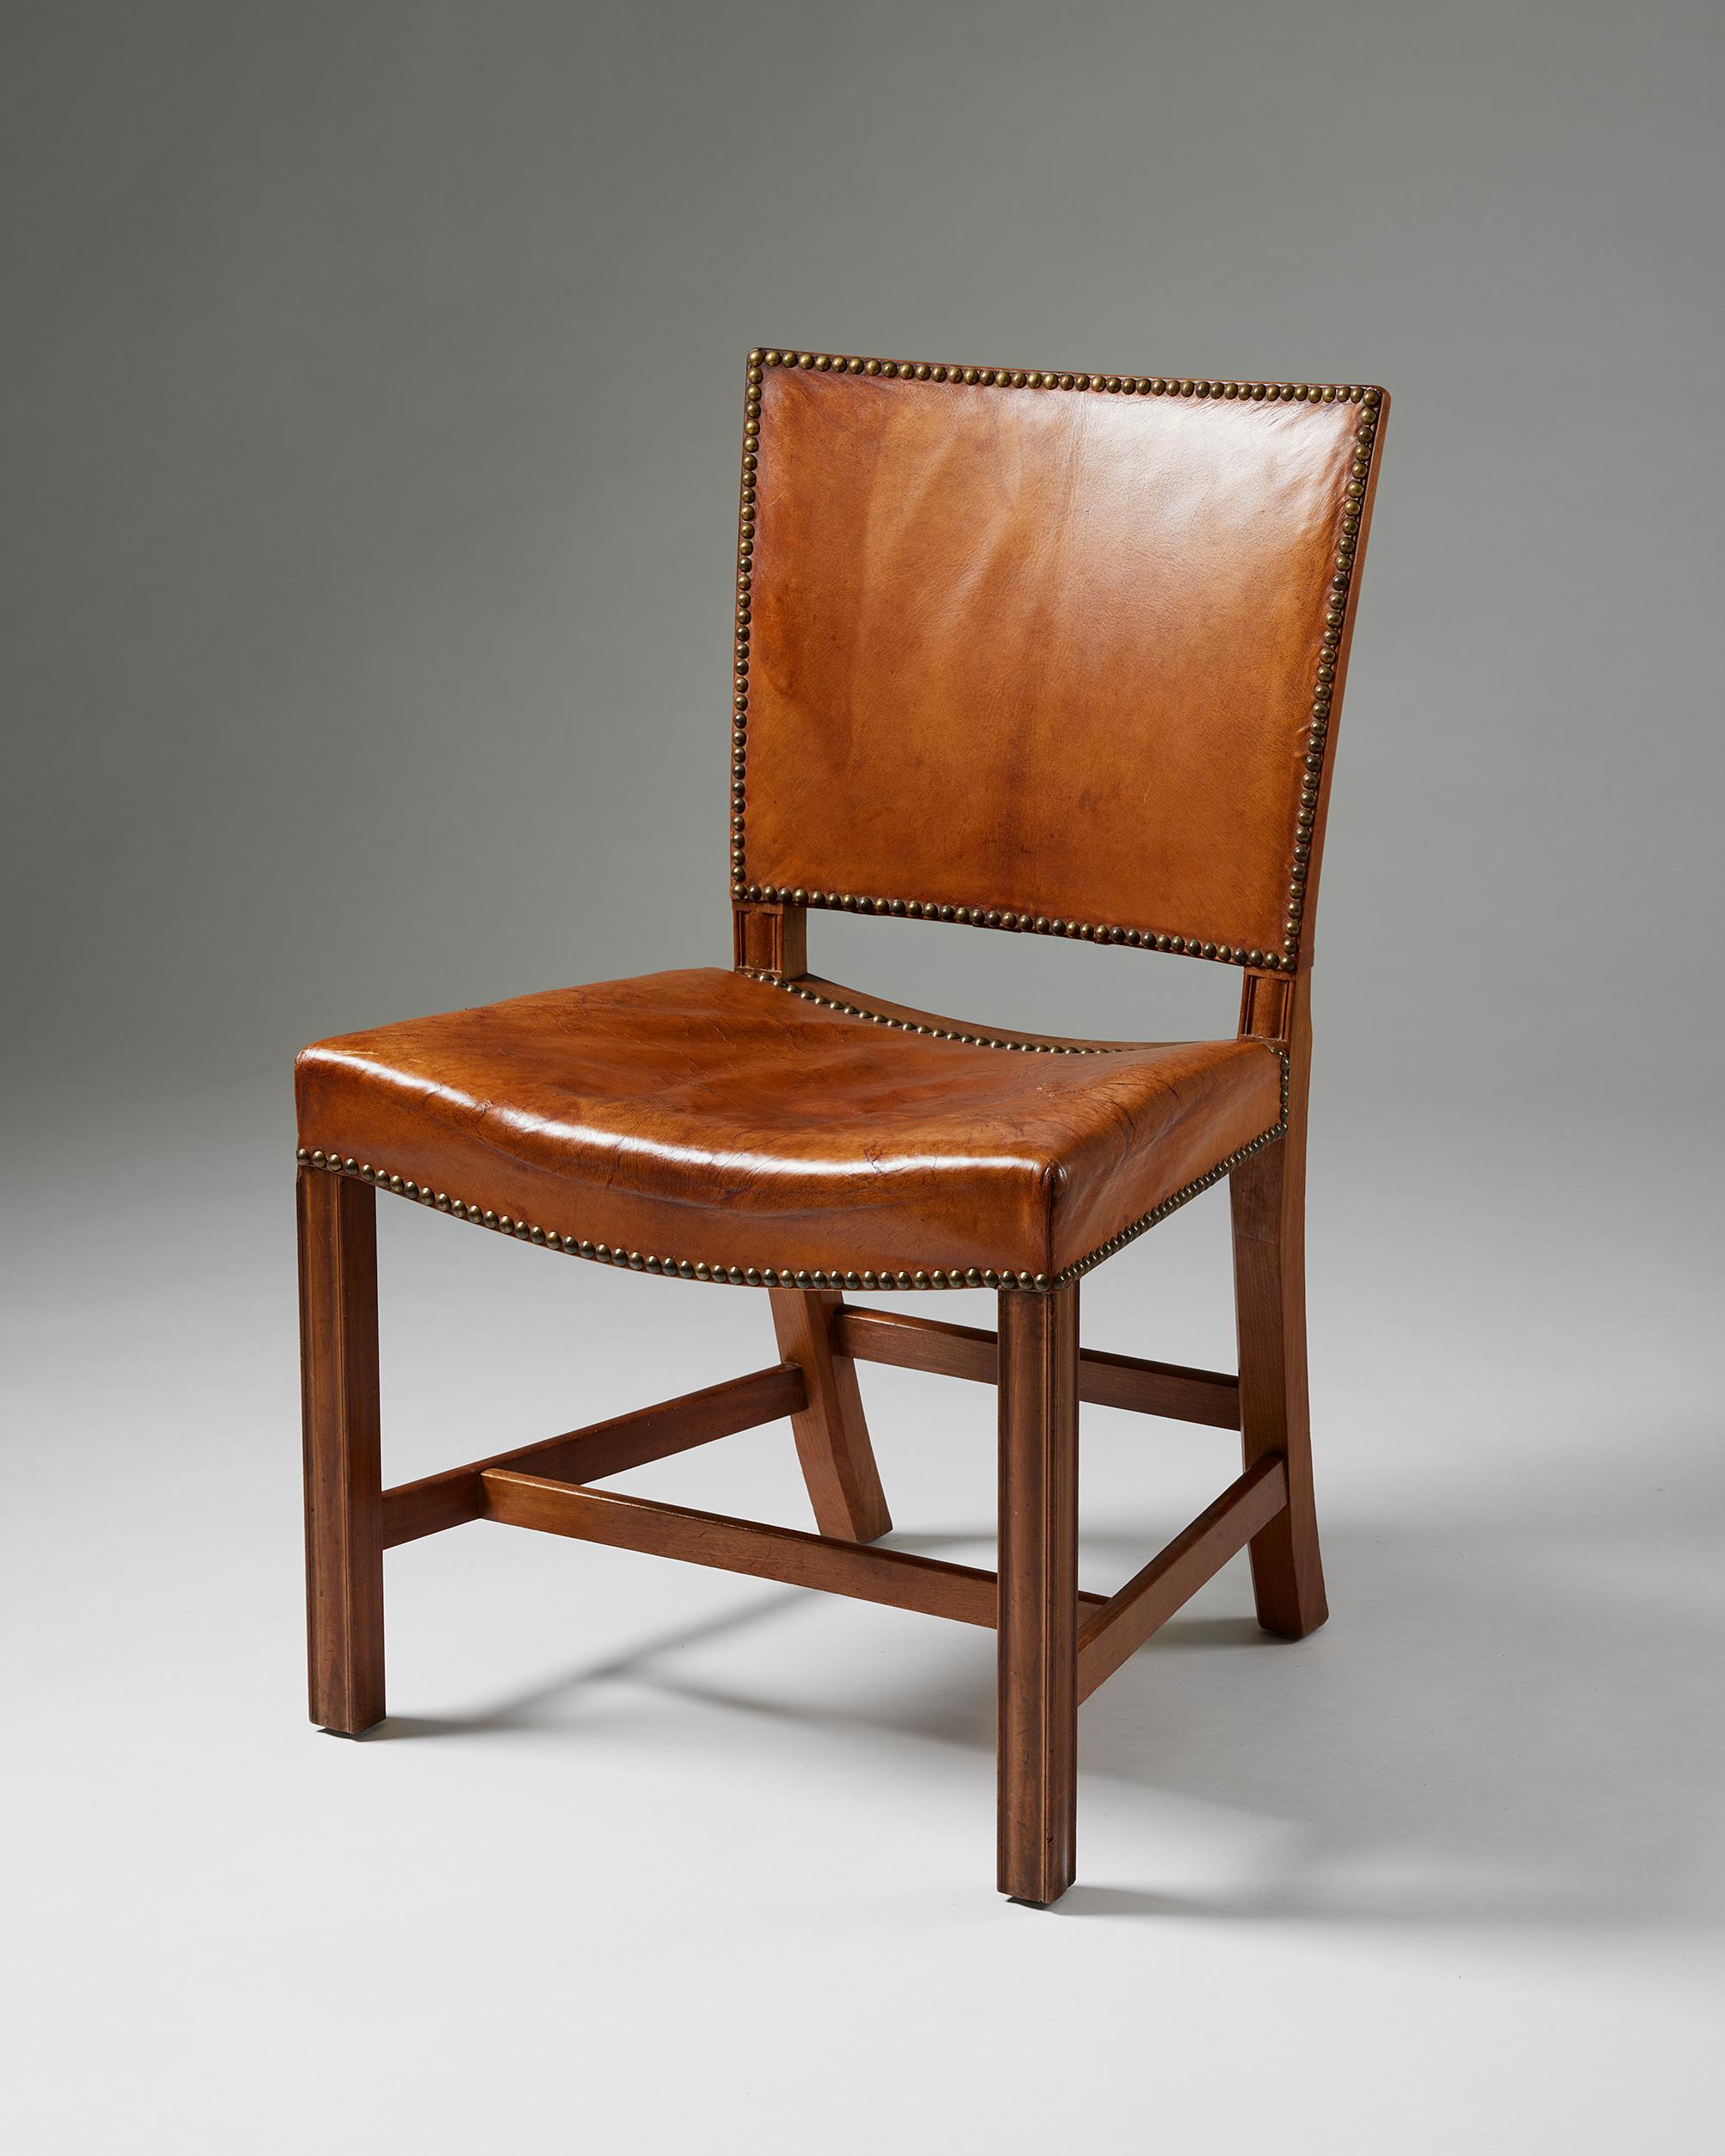 ‘The Red Chair’ model 3758 designed by Kaare Klint for Rud. Rasmussen Fabrik,
Denmark, 1927.

Cuban mahogany, Niger leather, upholstery and brass nails.

Marked.

Kaare Klint was the father of Scandinavian modernism and is responsible for bringing